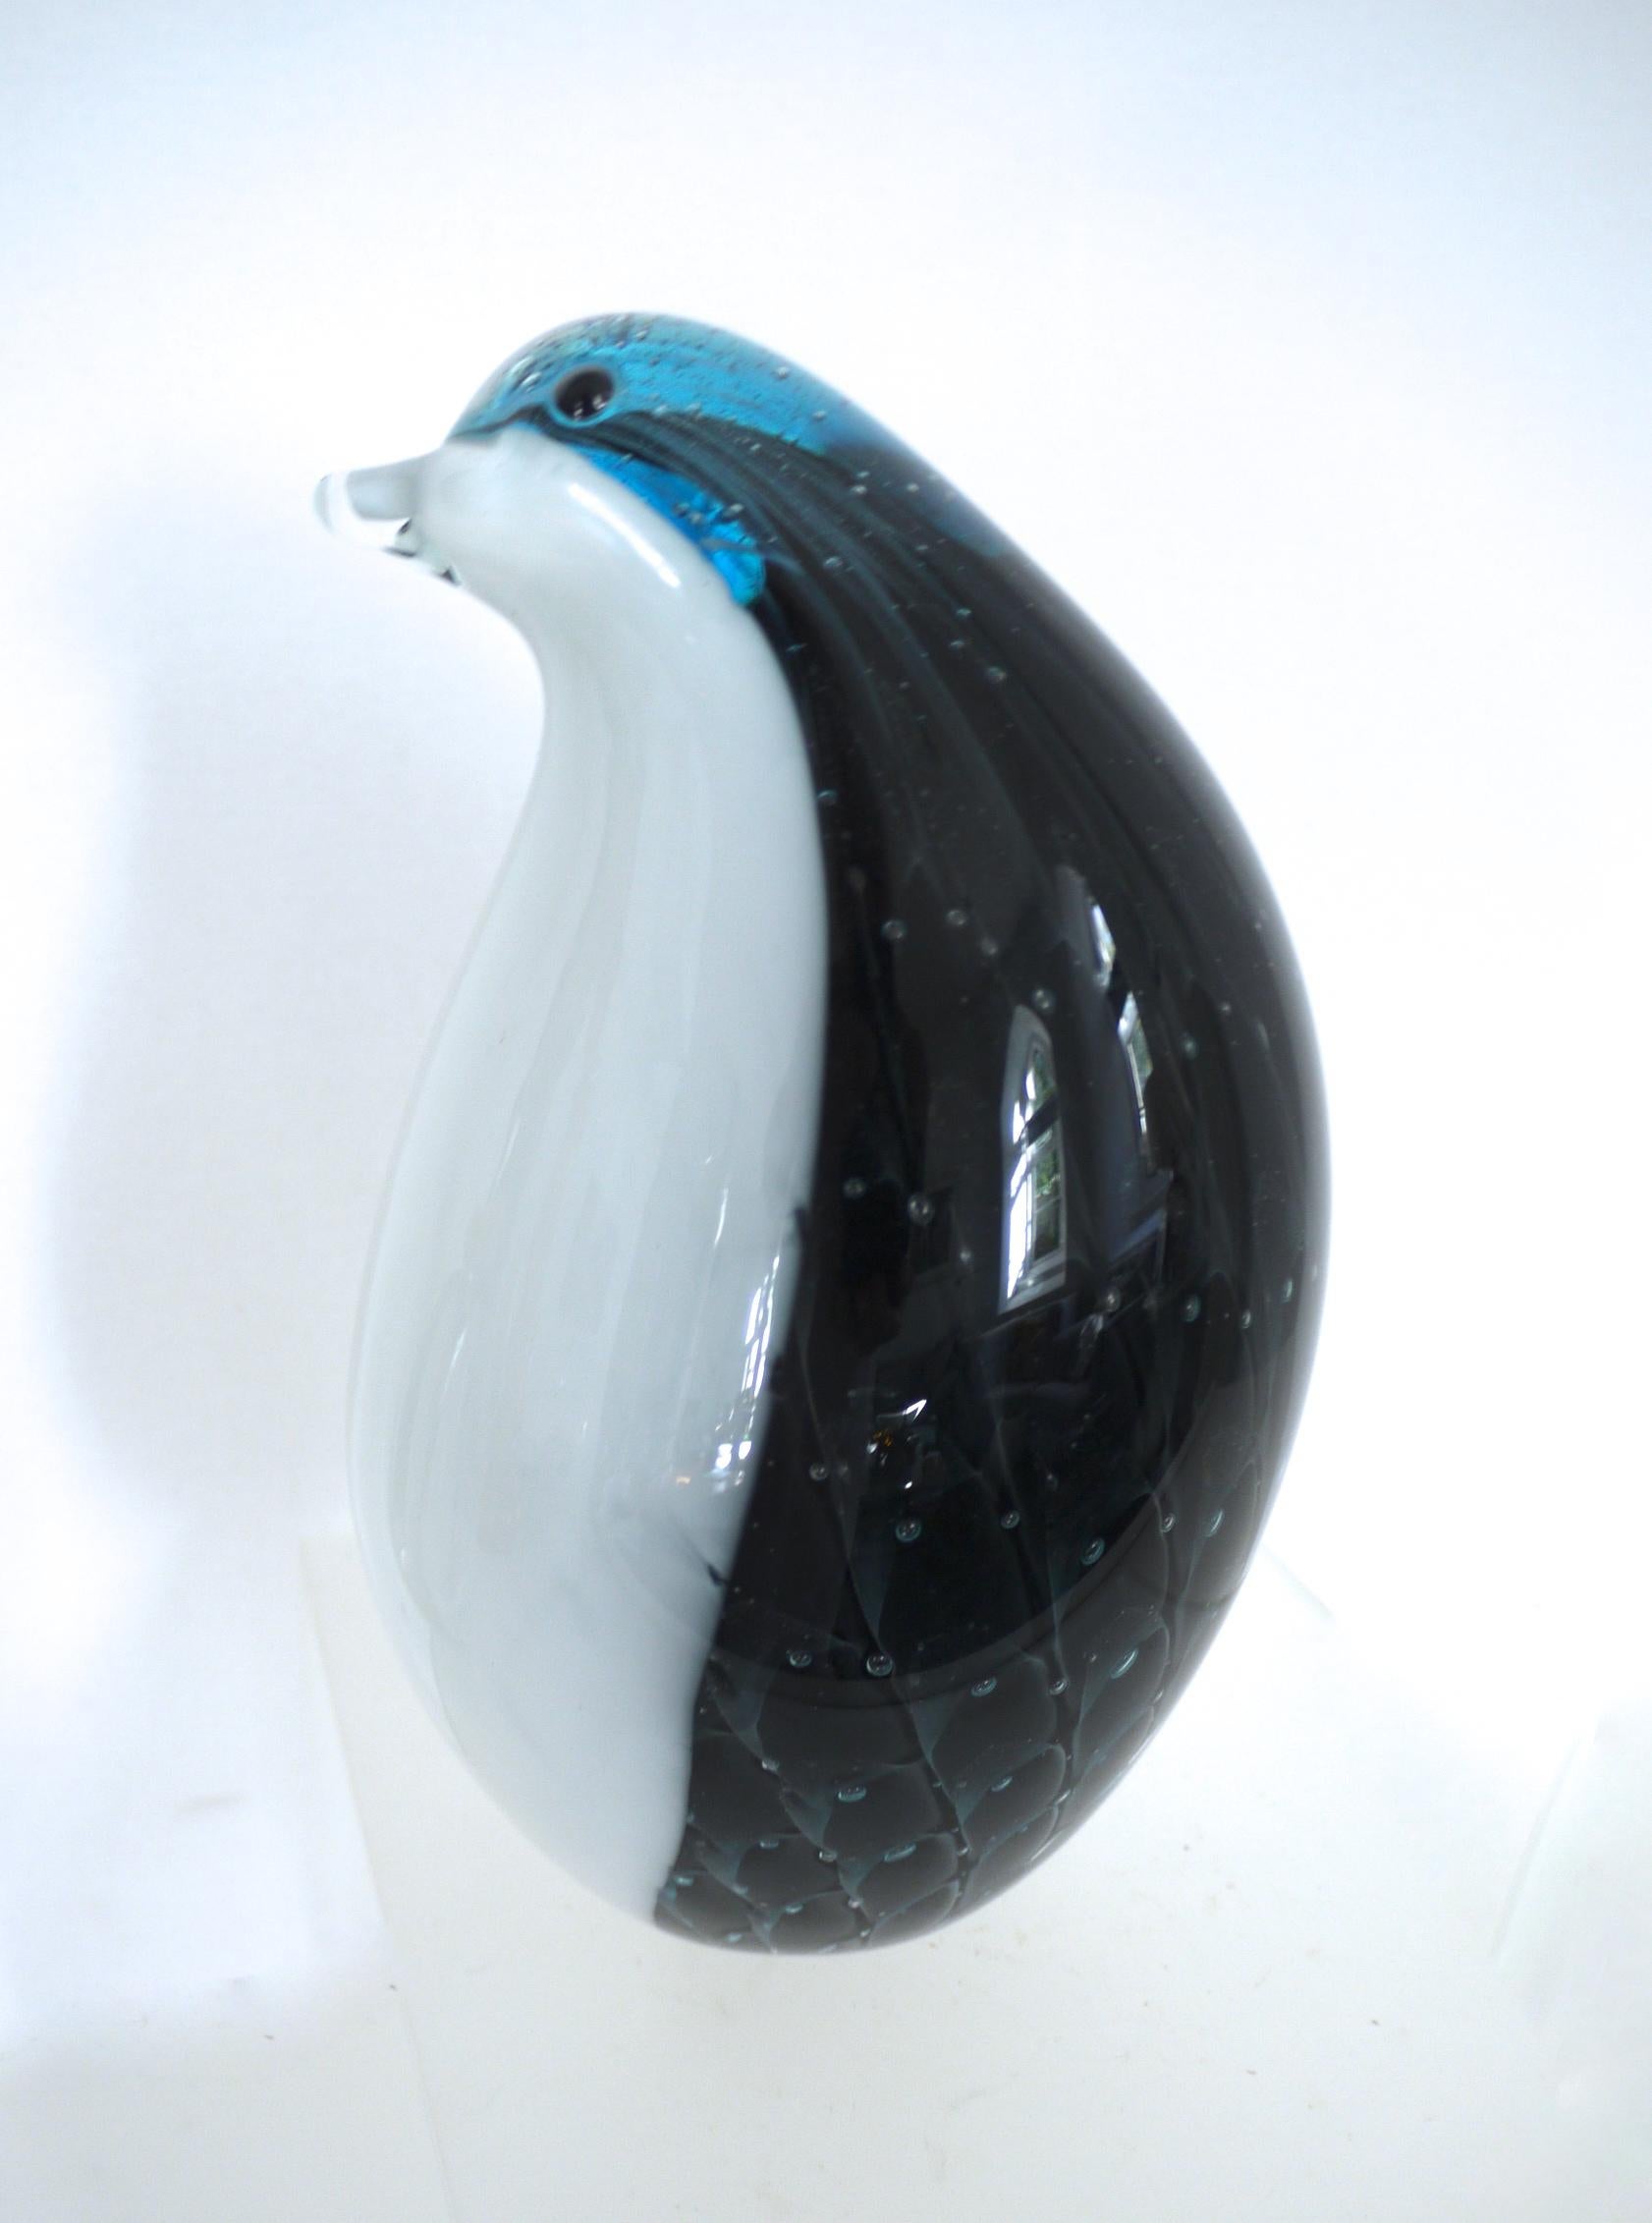 Murano modernist penguin figurine Archimede Seguso Art Vitra 1975-1979 Sommerso
Archimede Seguso was an Italian glass manufacturer known for his intricate glass vases, necklaces, and sculptures. Spanning a wide range of forms and colors, his